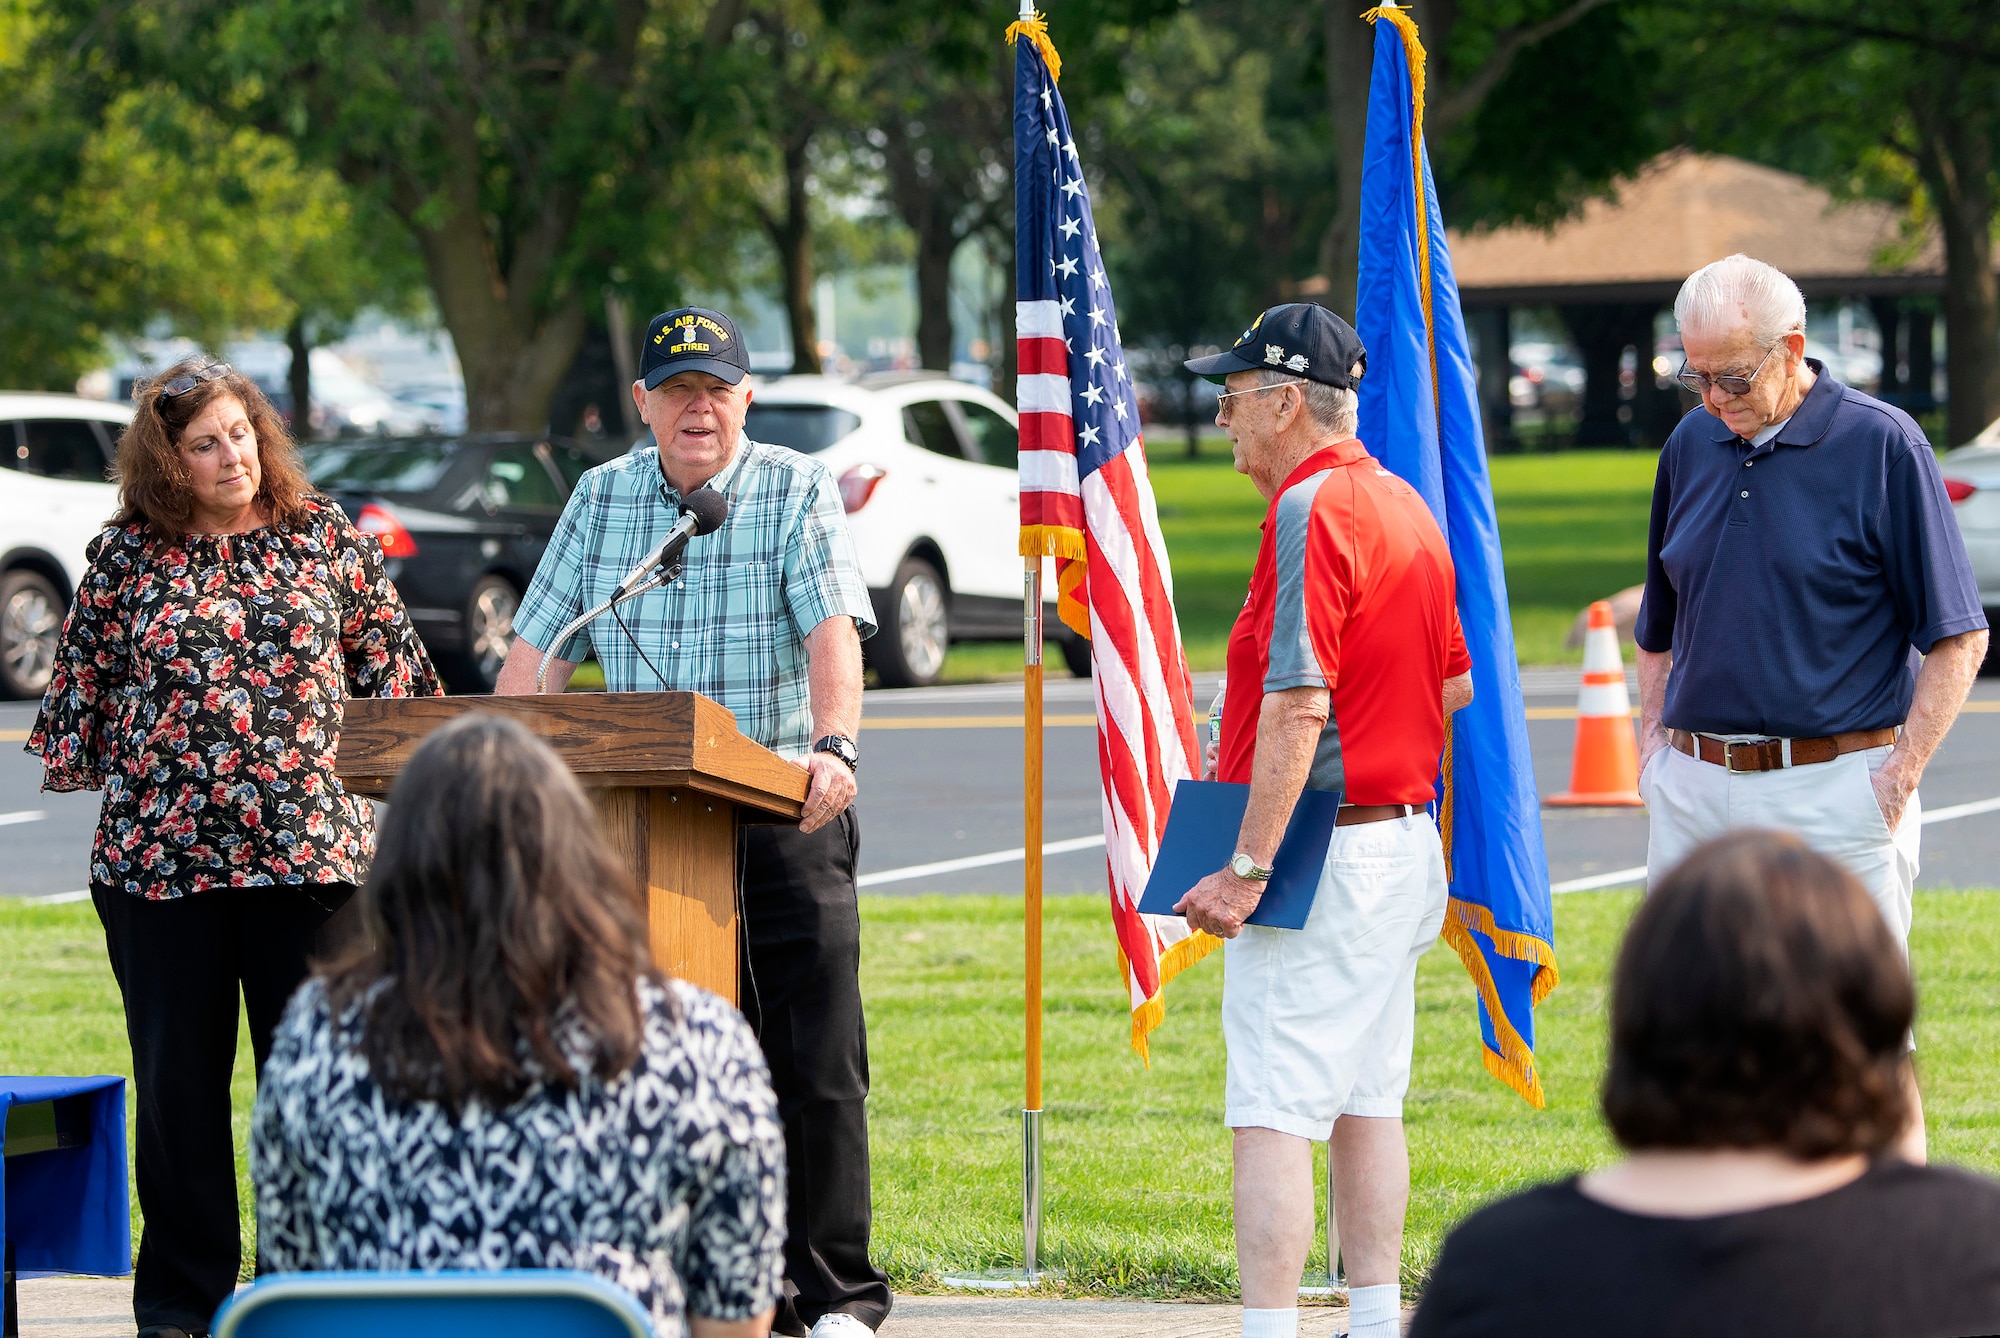 Steve Litten speaks as two of his brothers listen during a ceremony dedicating a memorial bench in their honor, at the National Museum of the Air Force, Wright-Patterson Air Force Base, Ohio, July 20, 2021. The seven Litten brothers honored on this bench served a combined total of 137 years in the U.S. Air Force. (U.S. Air Force photo by R.J. Oriez)